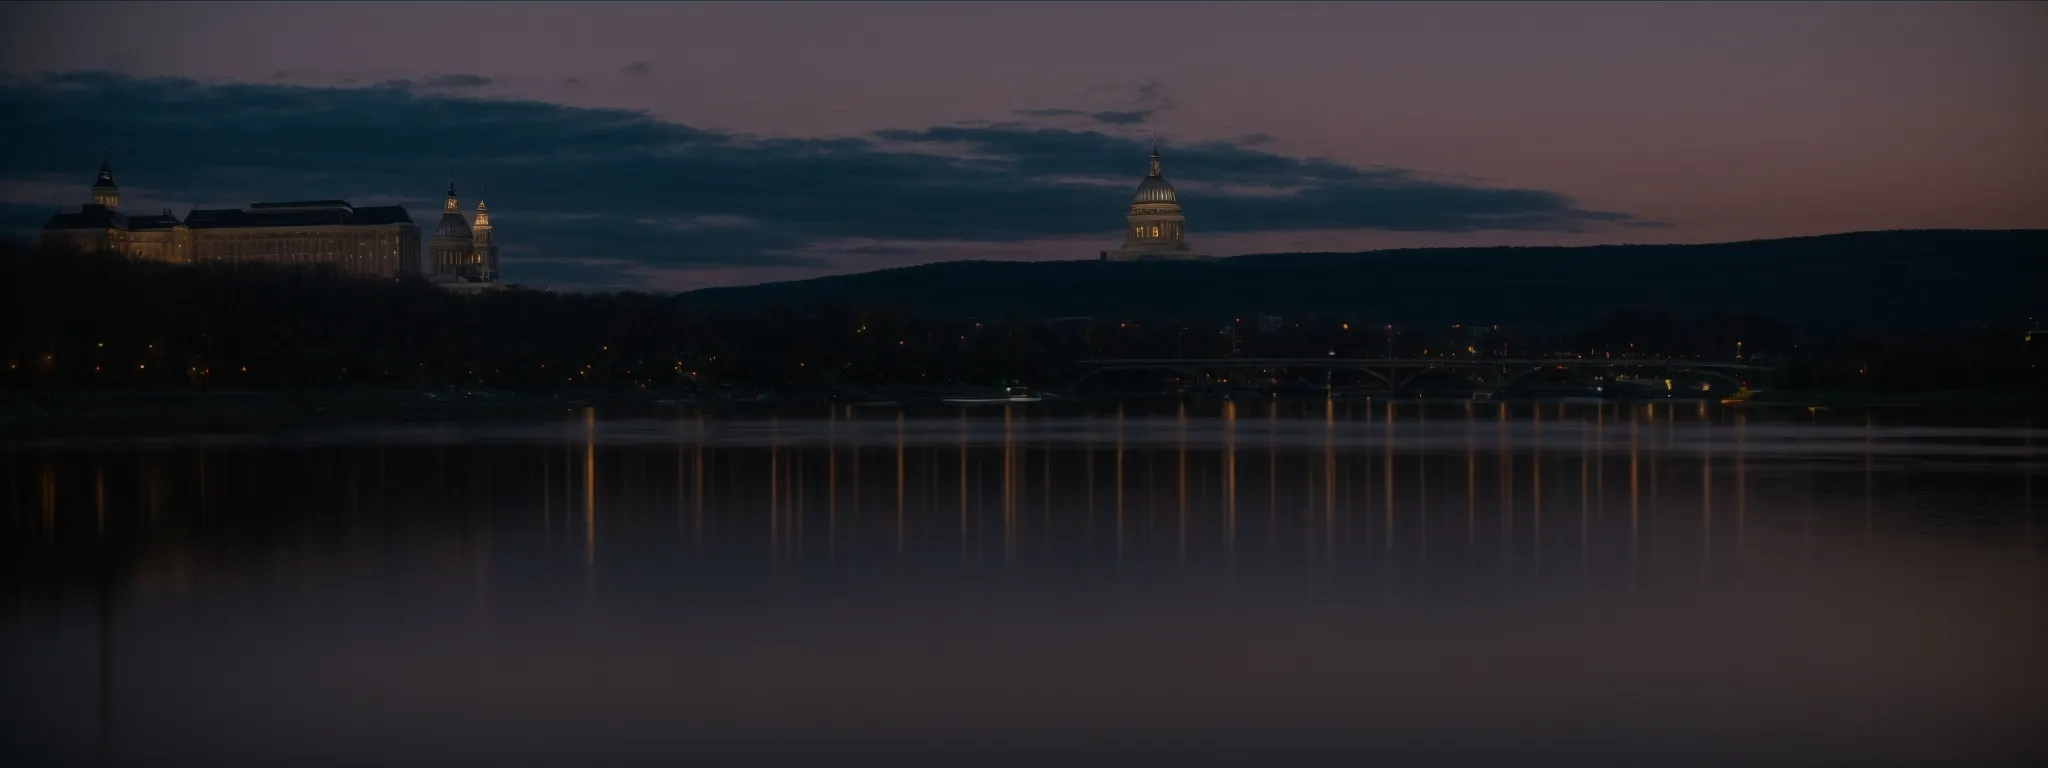 view of the harrisburg capitol building reflecting in the susquehanna river at dusk, symbolizing local presence.